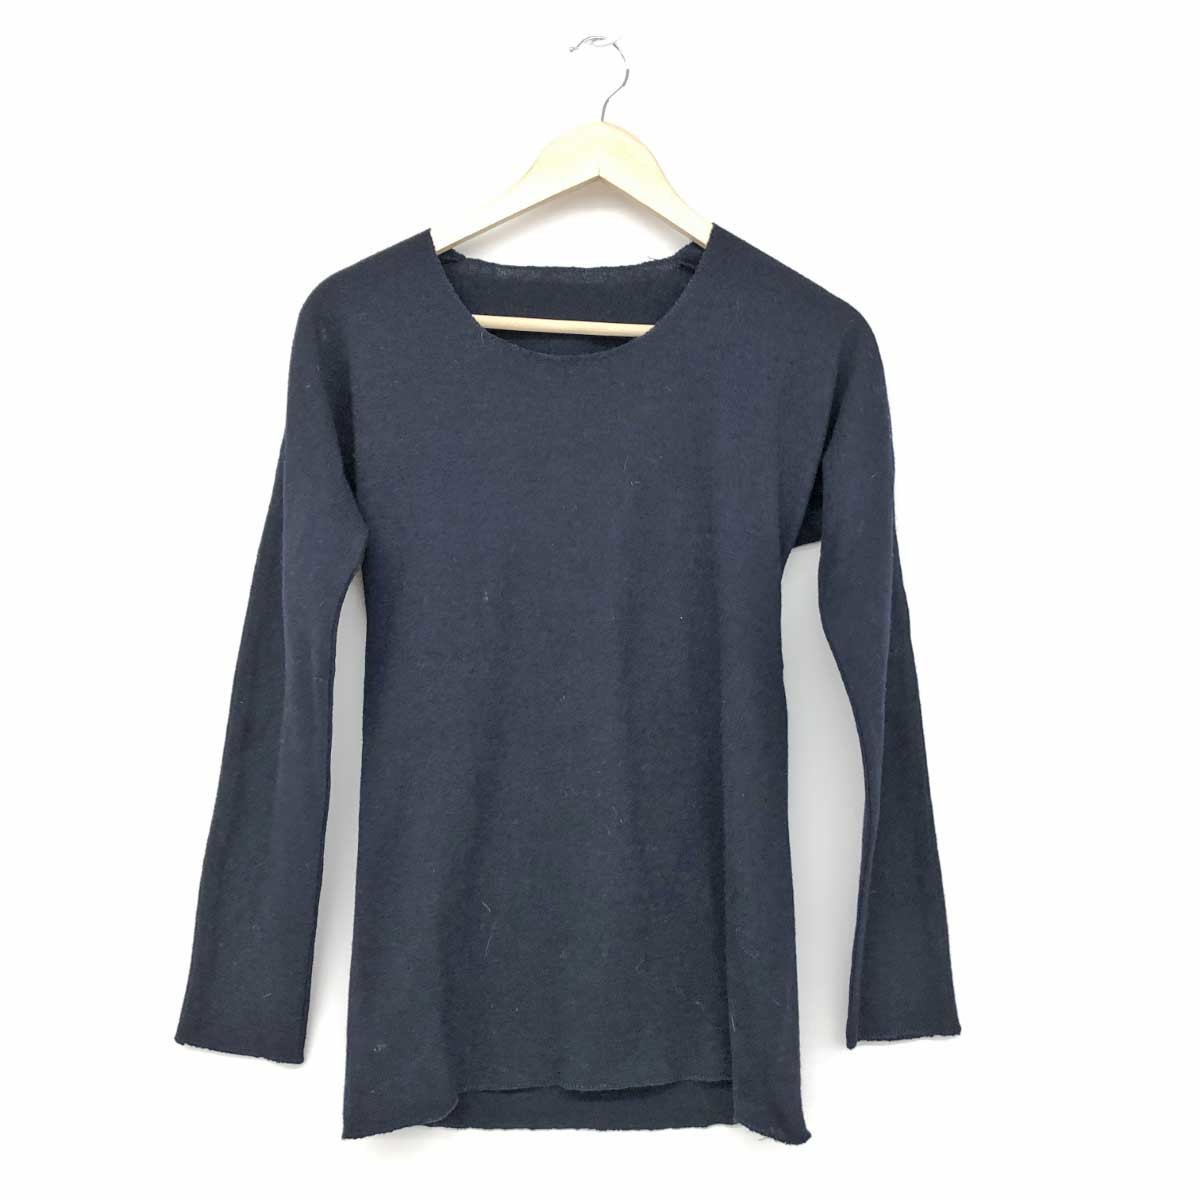 *COMME des GARCONS Comme des Garcons long sleeve knitted *GB-050200 navy wool lady's tops cut off Vintage 